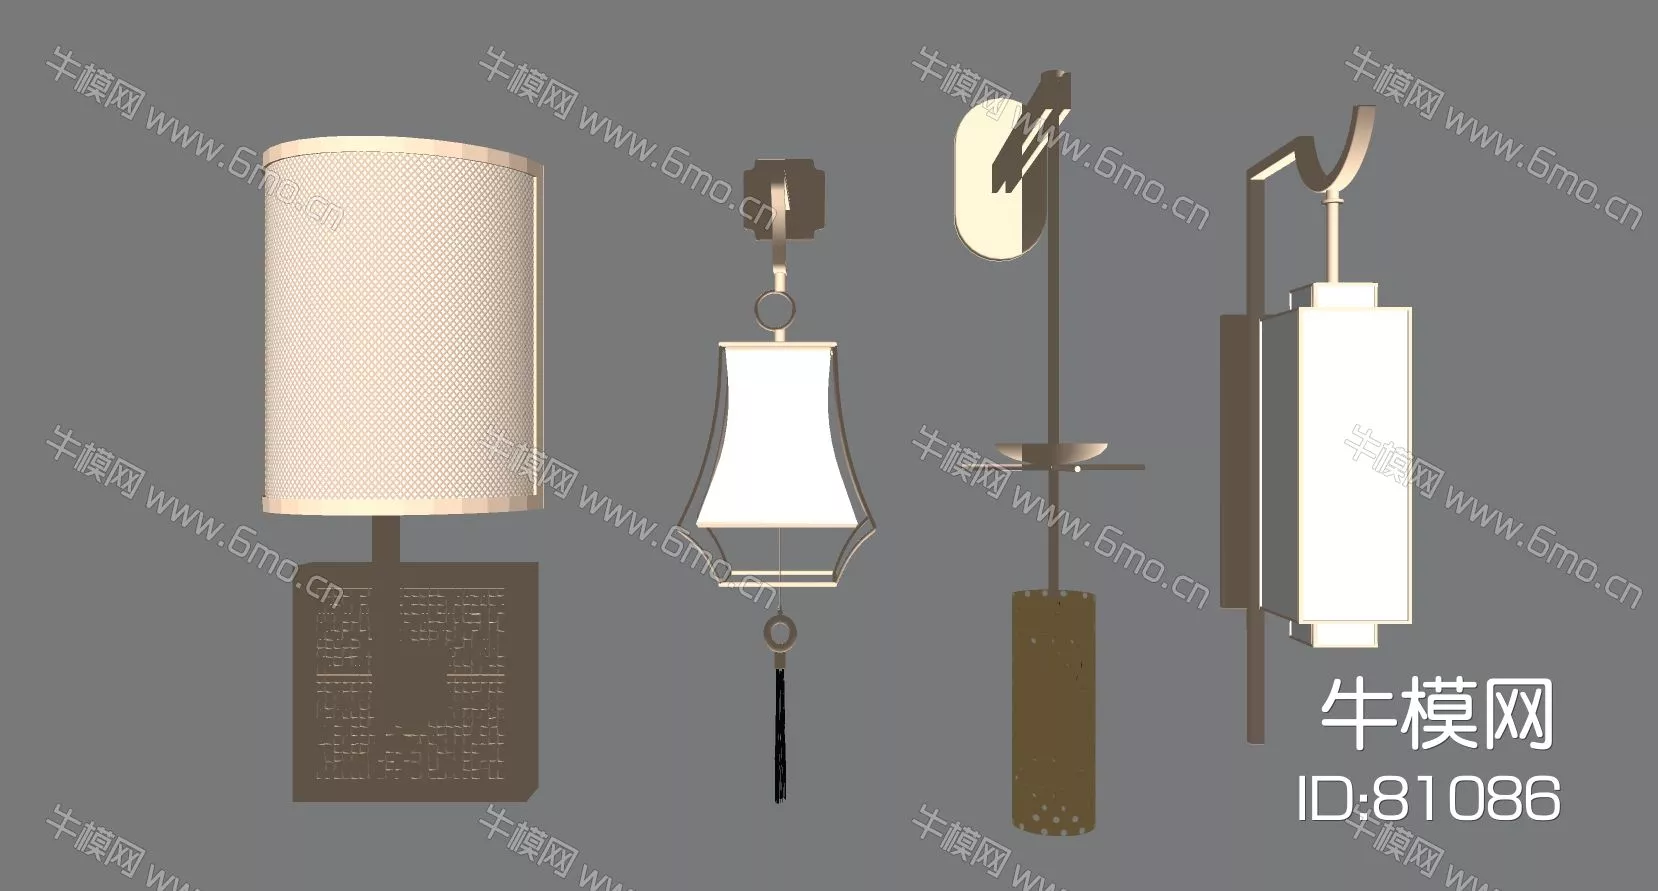 CHINESE WALL LAMP - SKETCHUP 3D MODEL - ENSCAPE - 81086